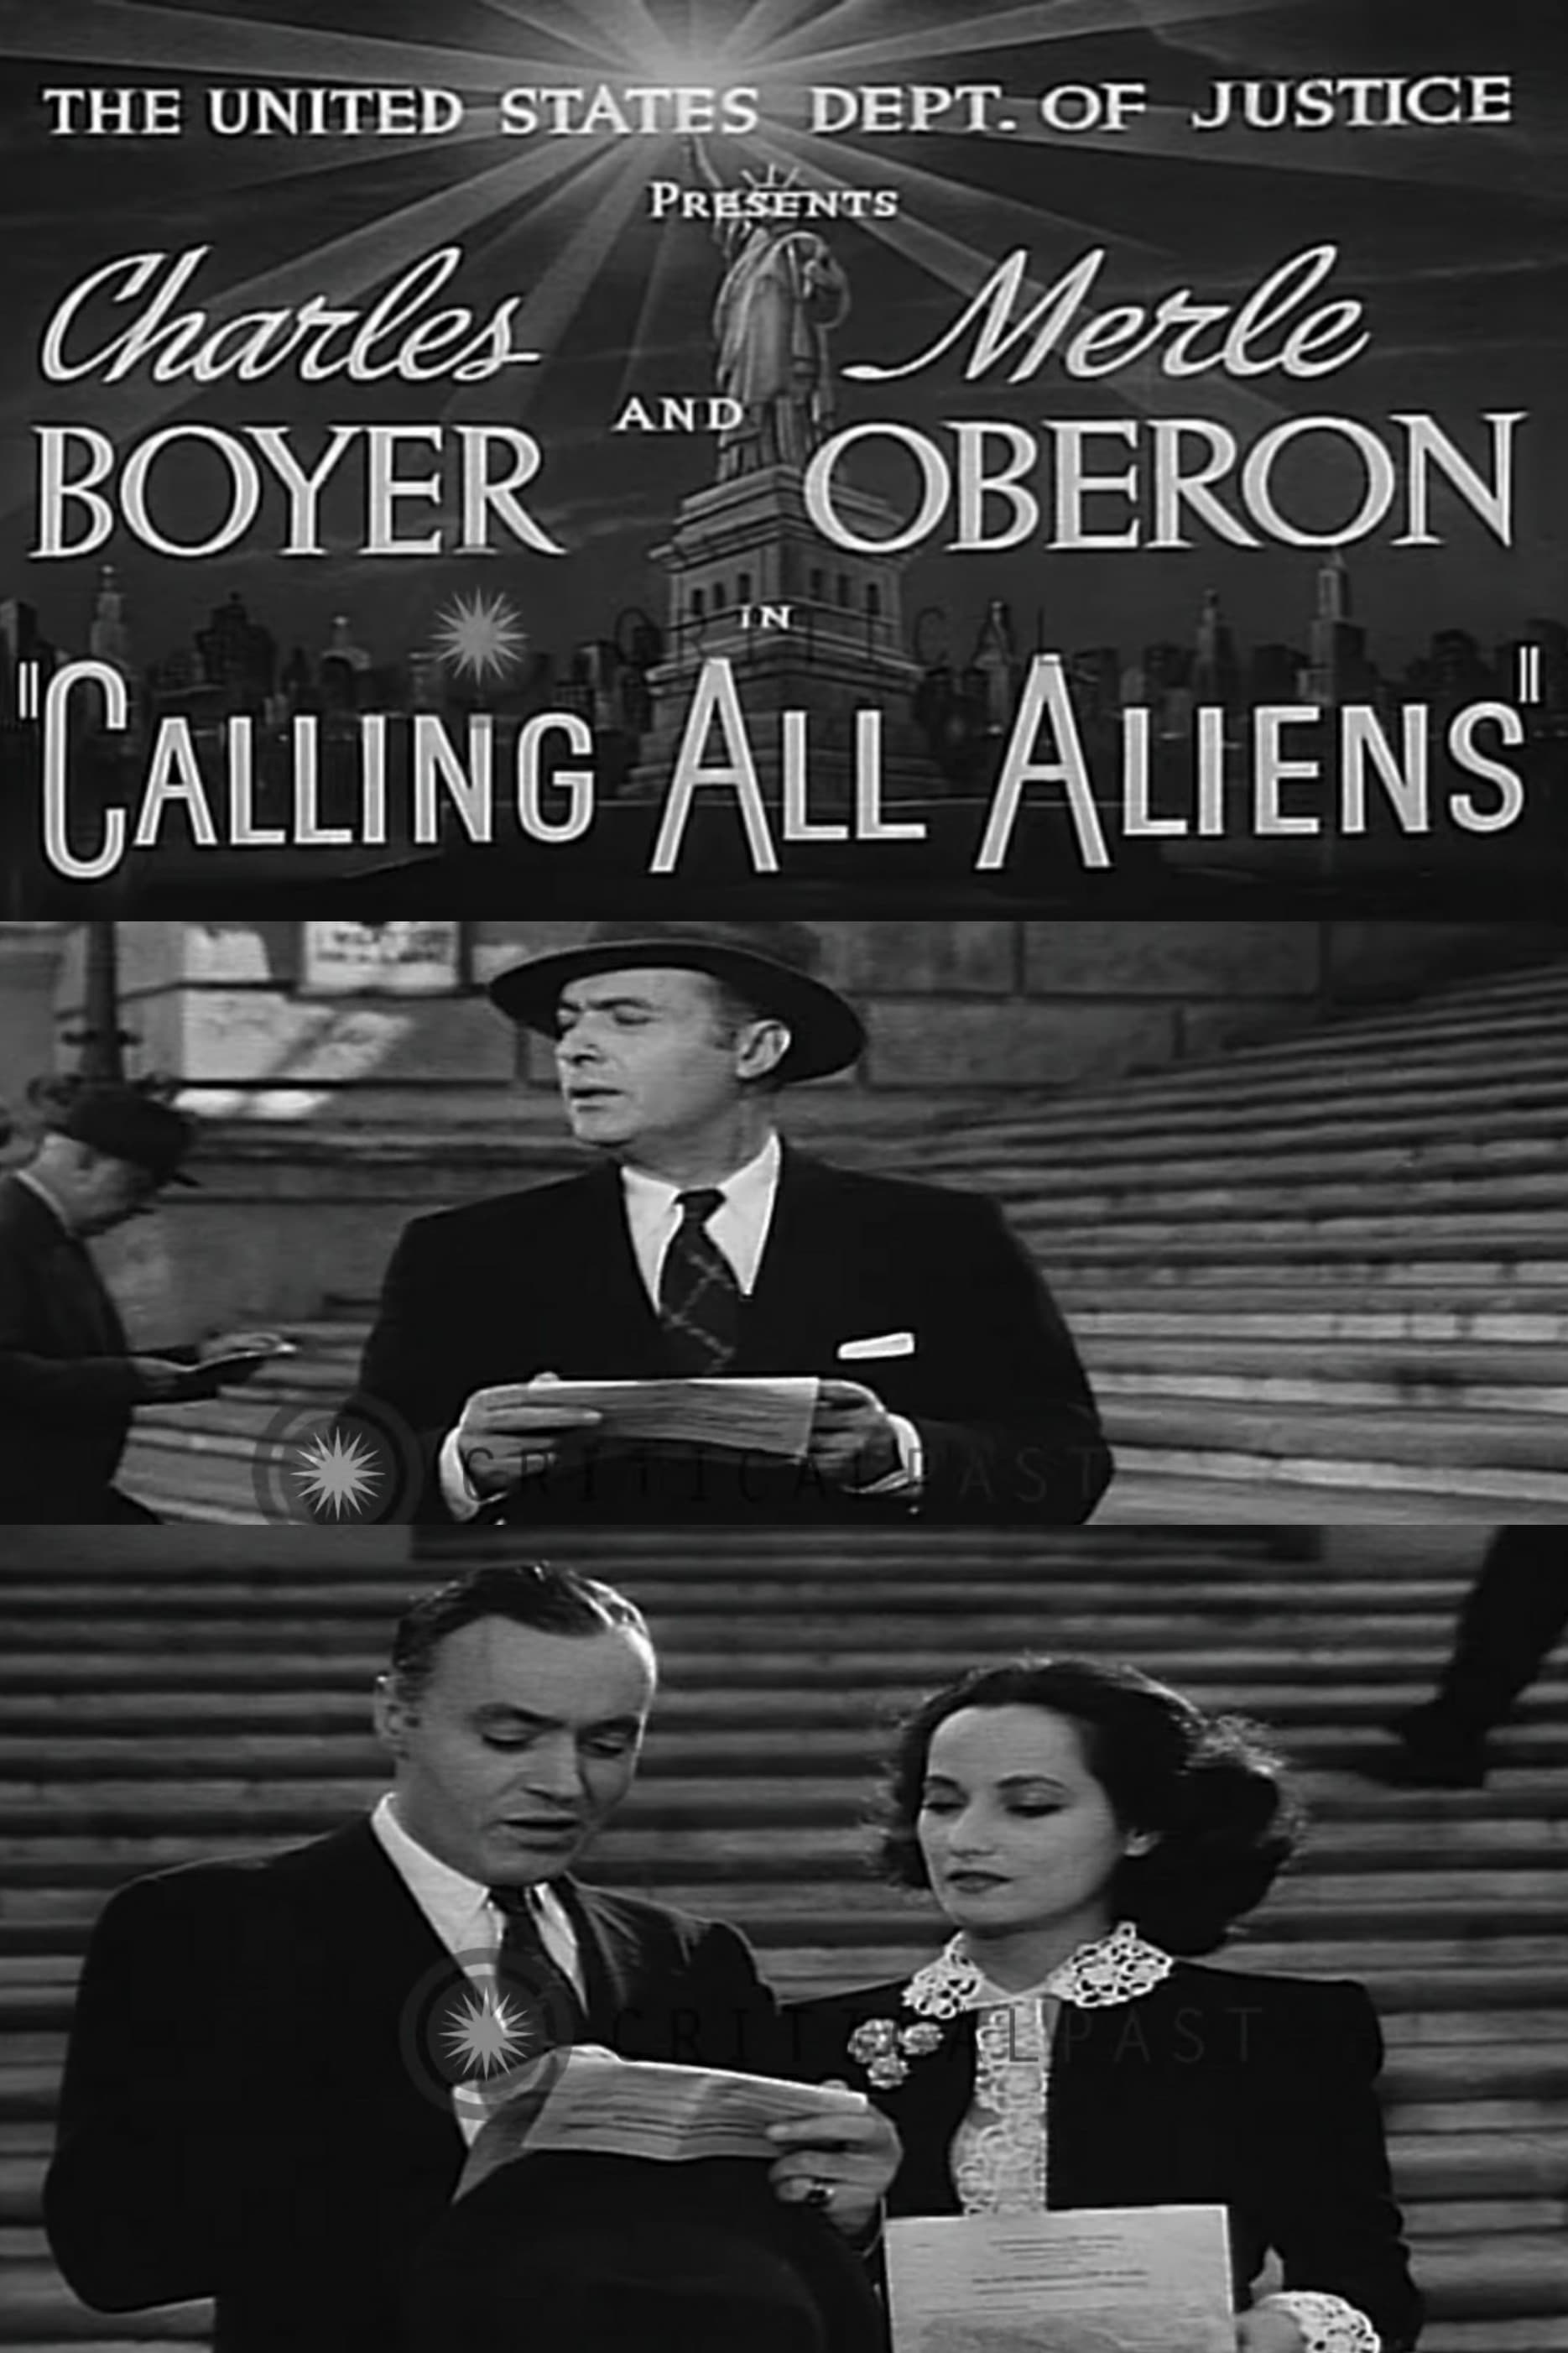 Calling All Aliens